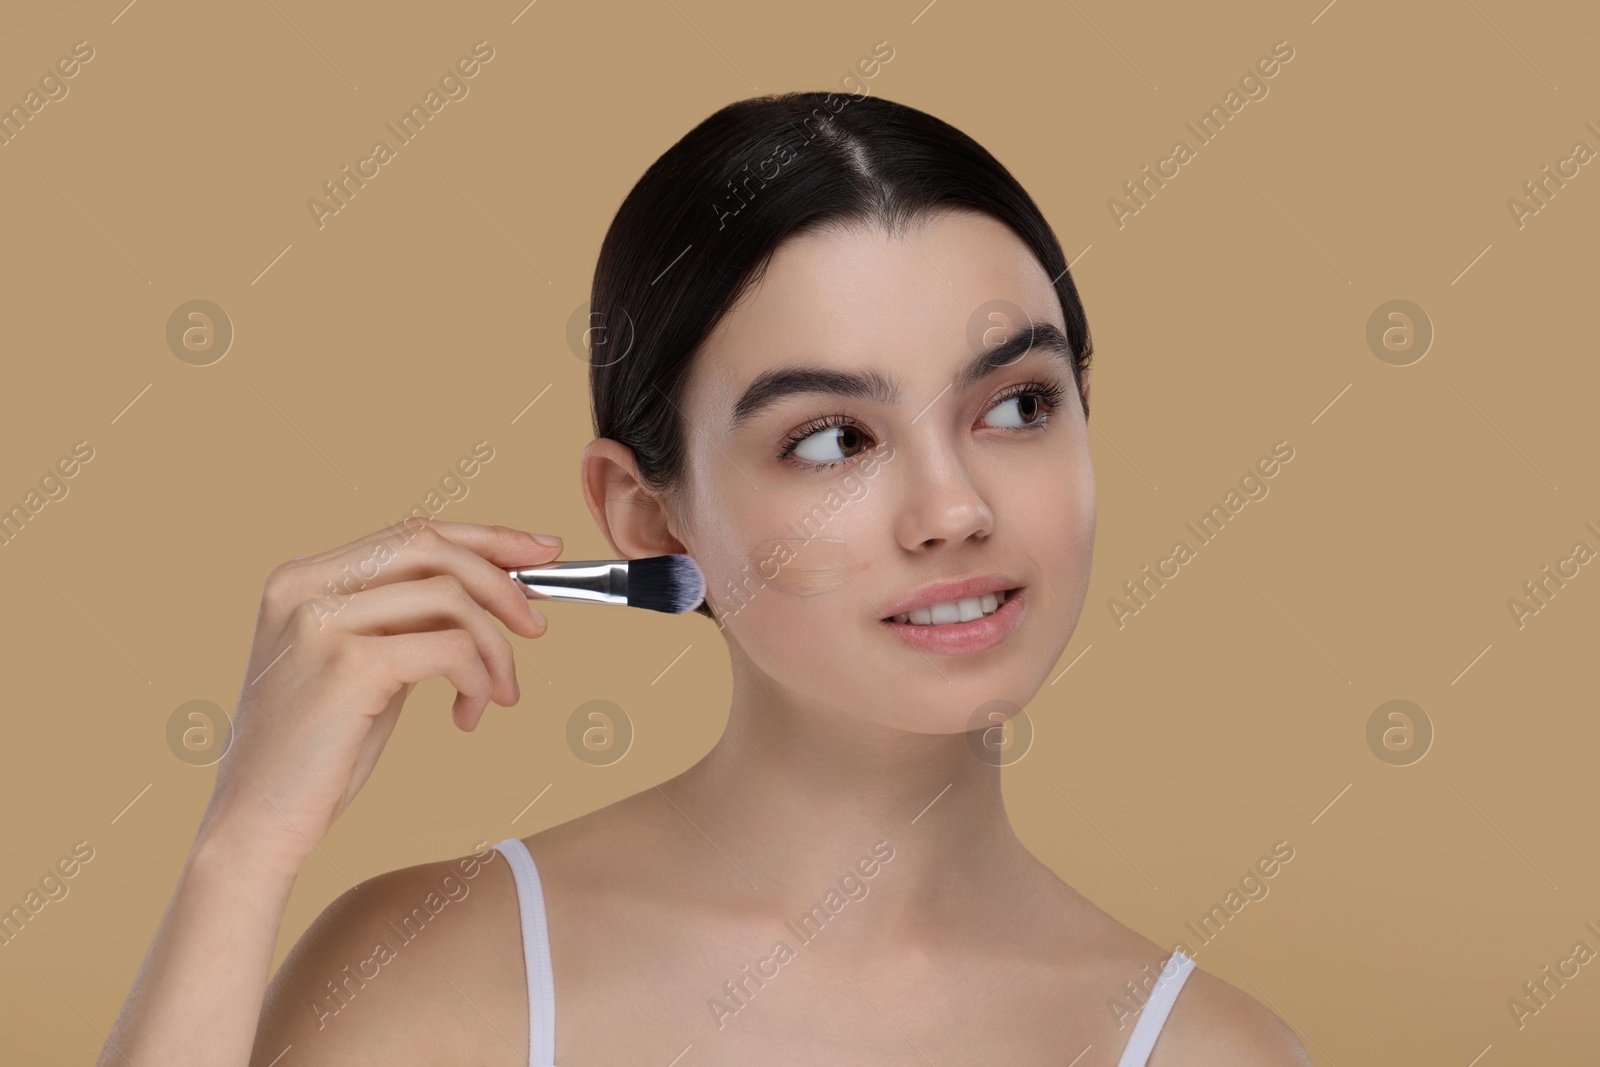 Photo of Teenage girl applying foundation on face with brush against beige background